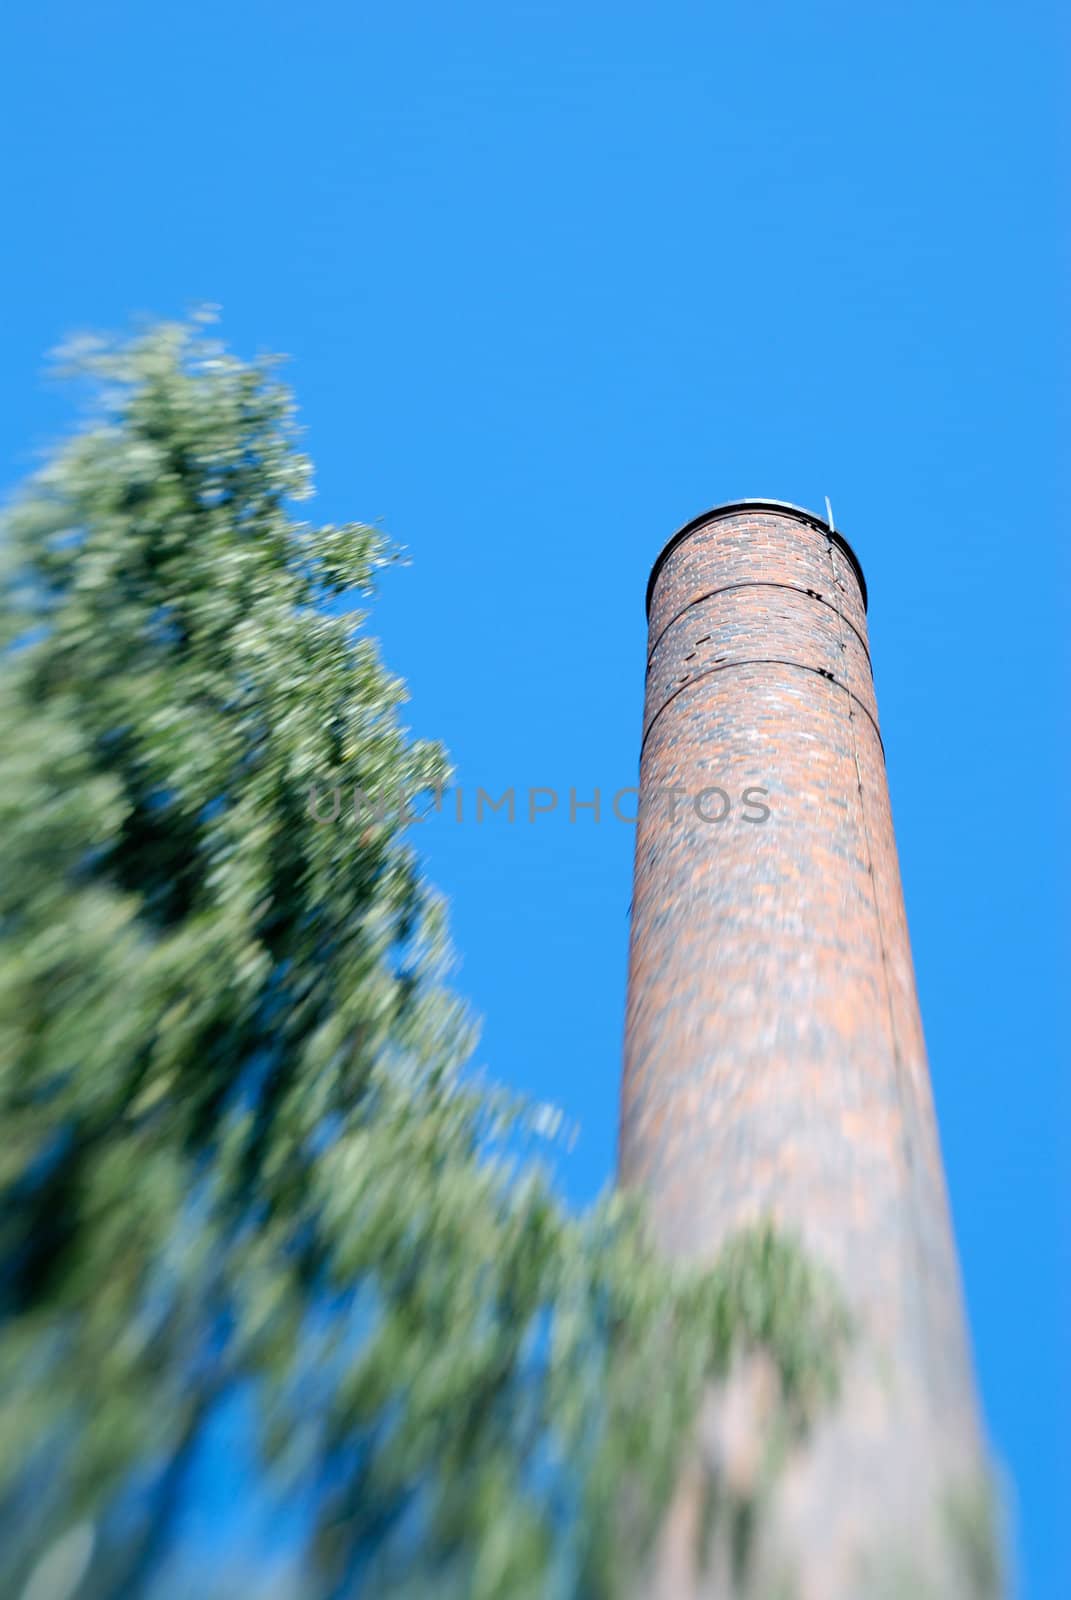 Old factory chimney made of brick. The zoom blur effect is achieved in-camera through use of Lensbaby.
